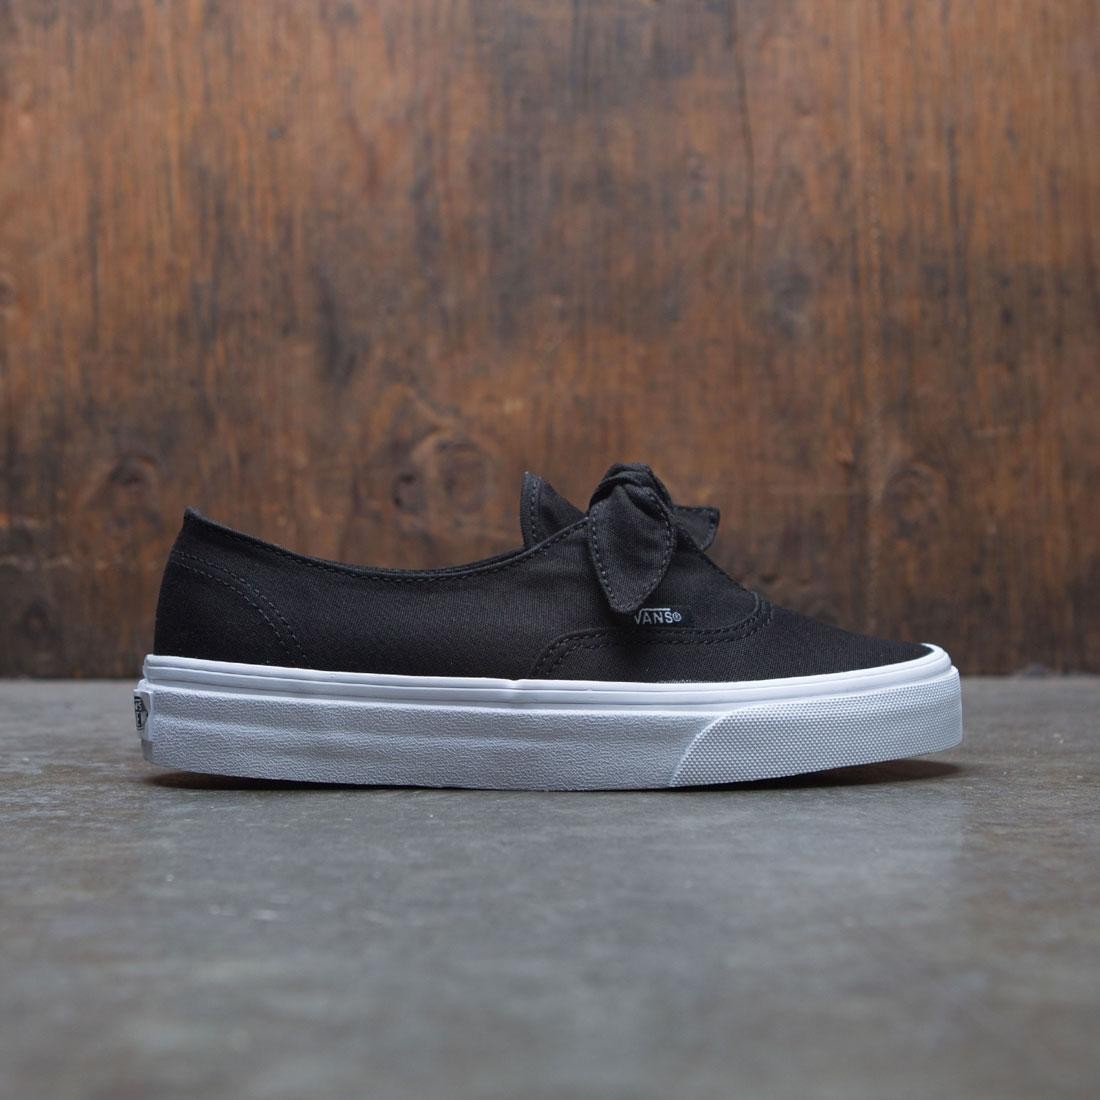 Vans Women Authentic Knotted black white